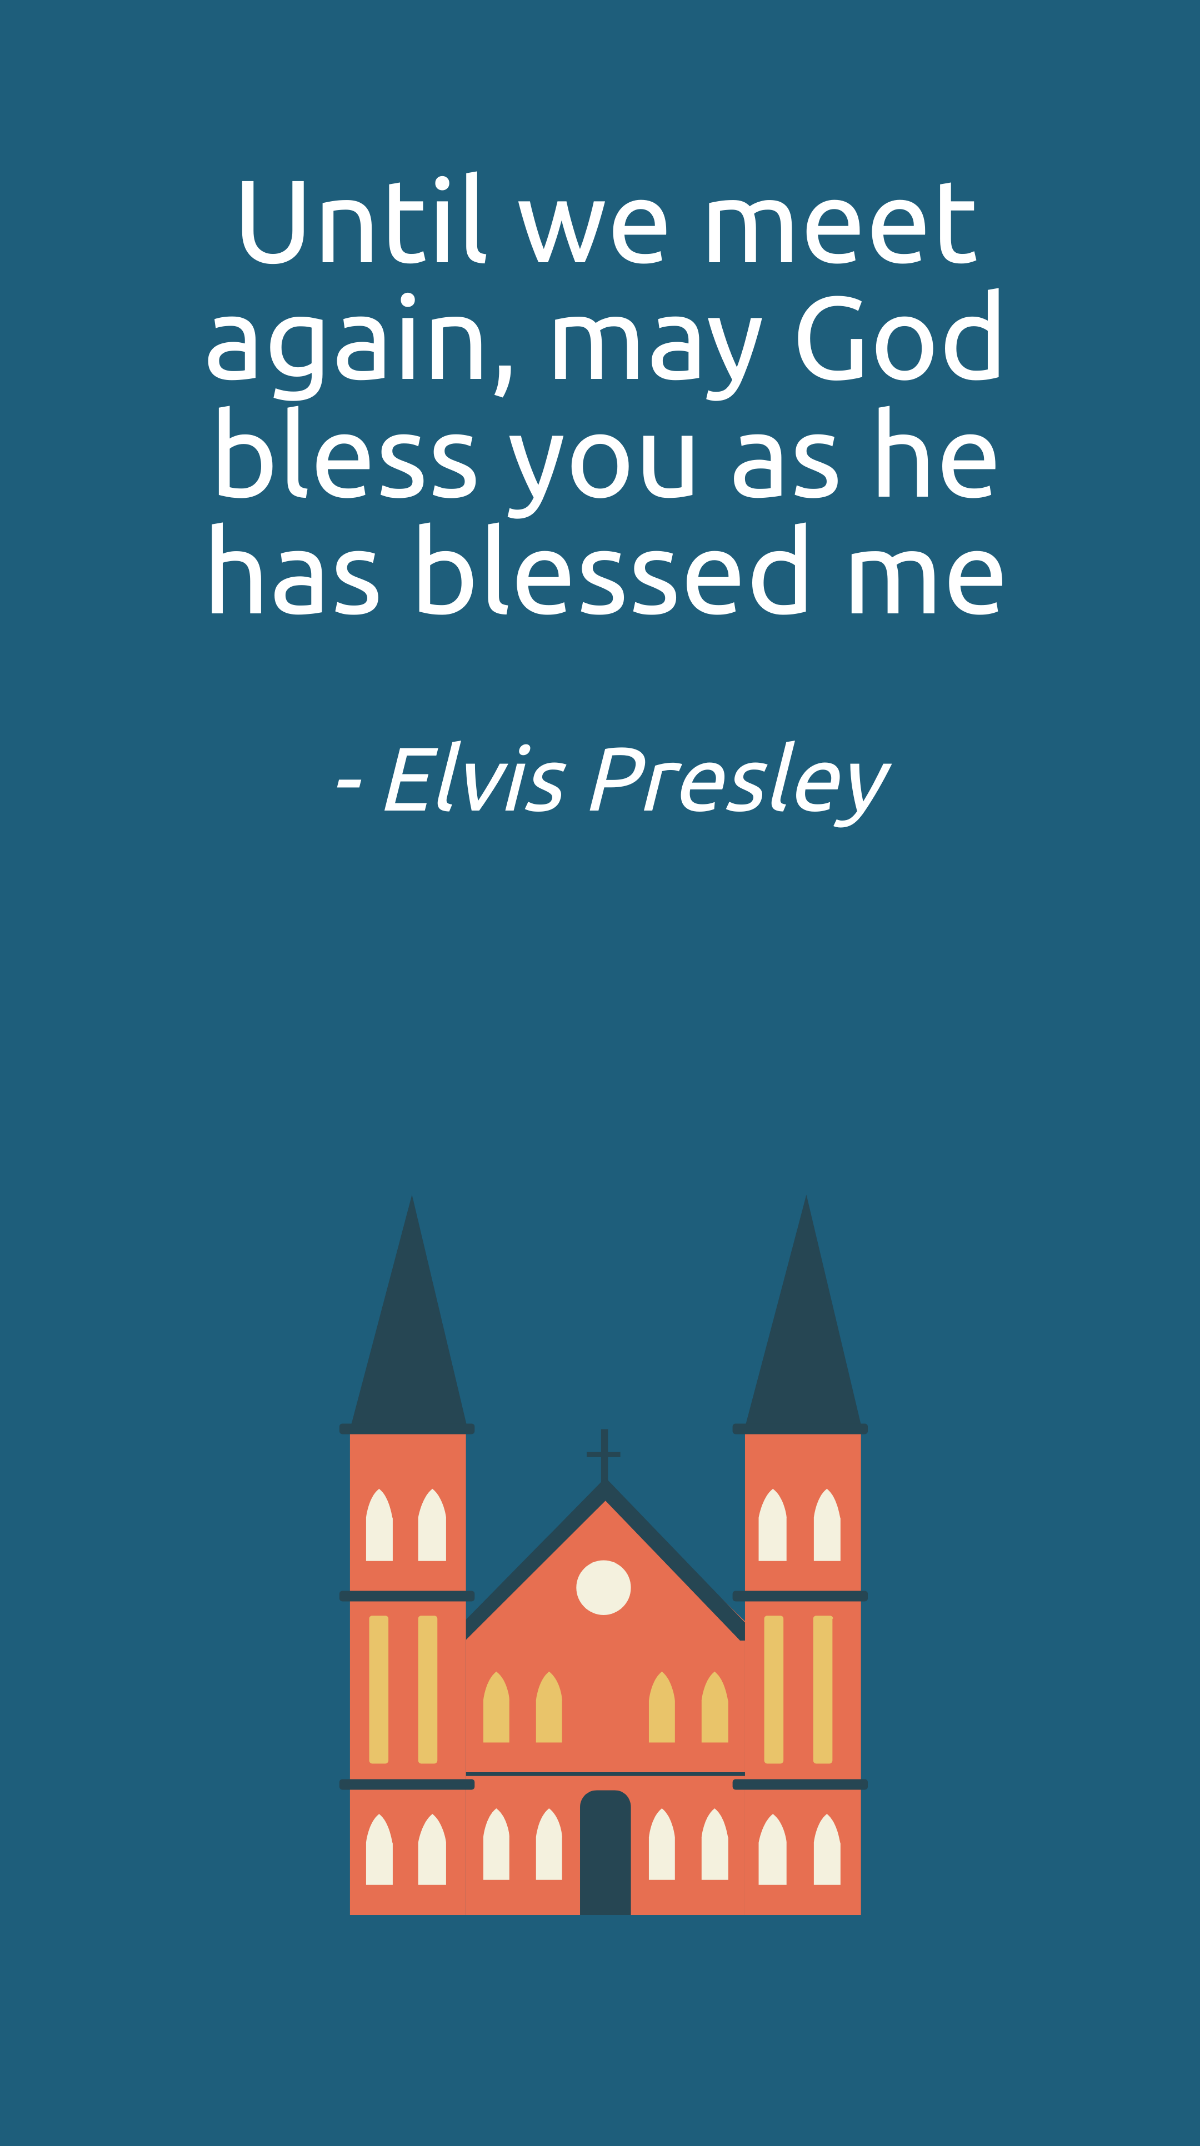 Elvis Presley - Until we meet again, may God bless you as he has blessed me Template